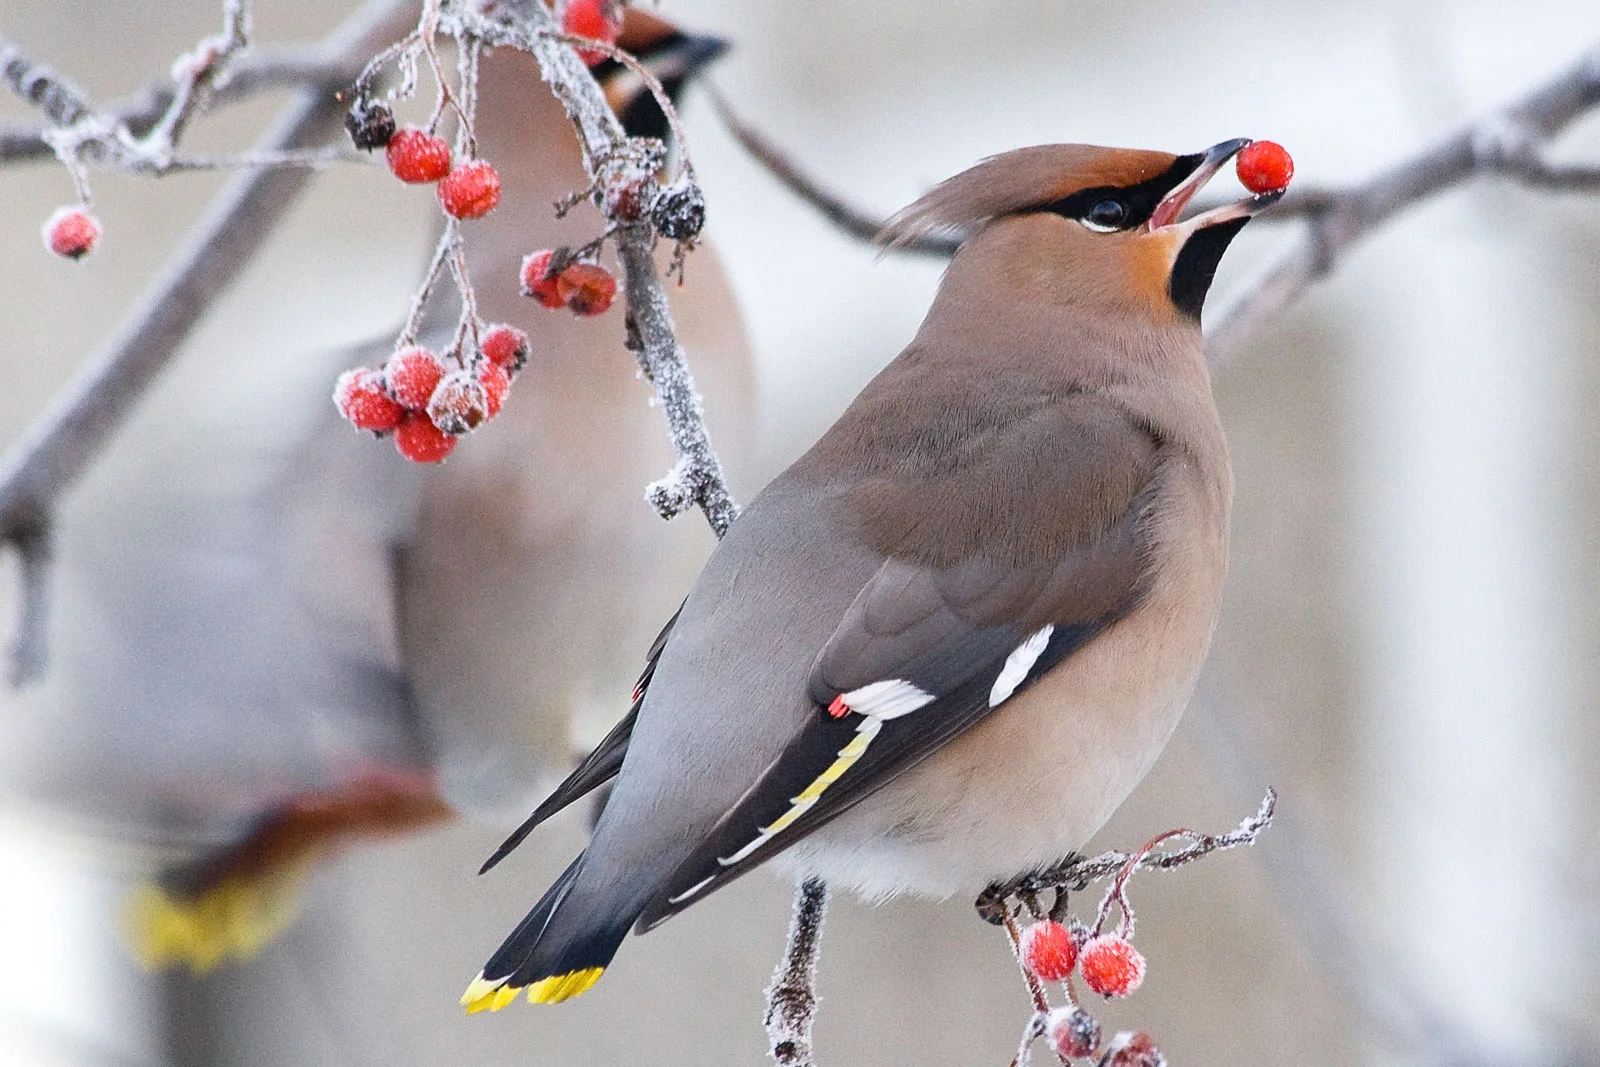 Waxwing small bird picking a rowan berry from a tree in snowy winter 